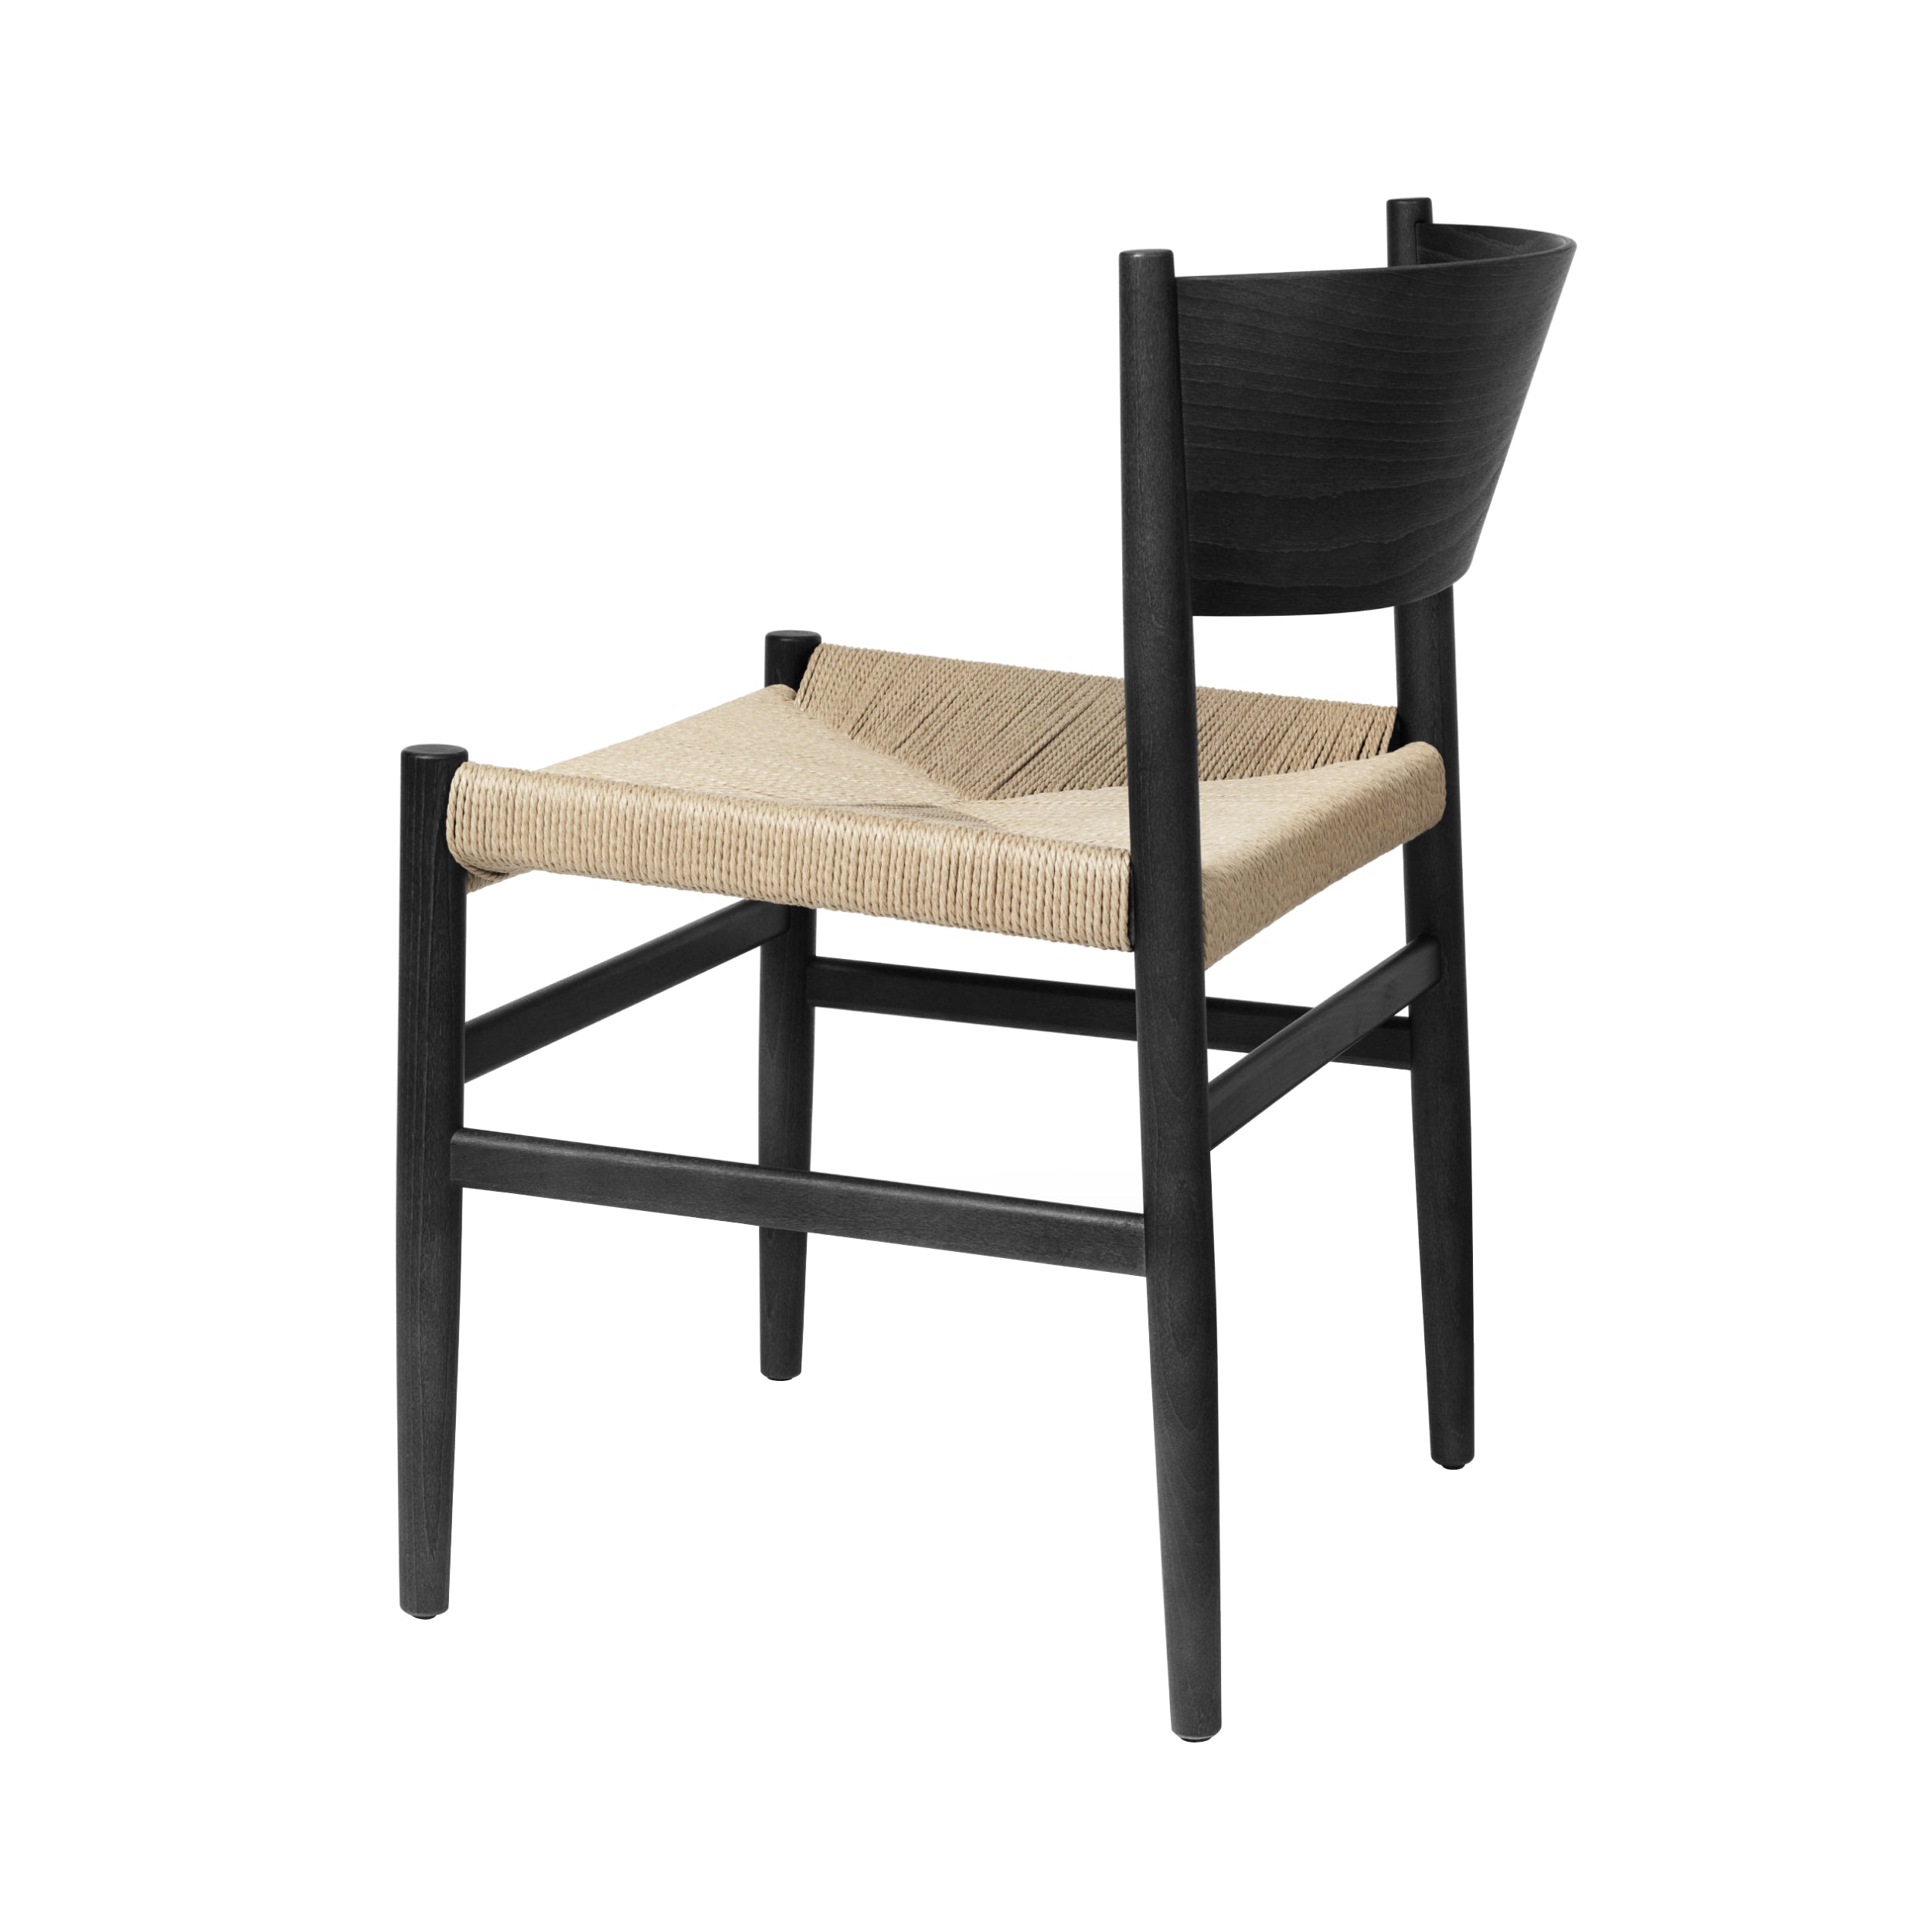 Nestor Chair: Black Beech + Natural Paper Cord + Without Armrest